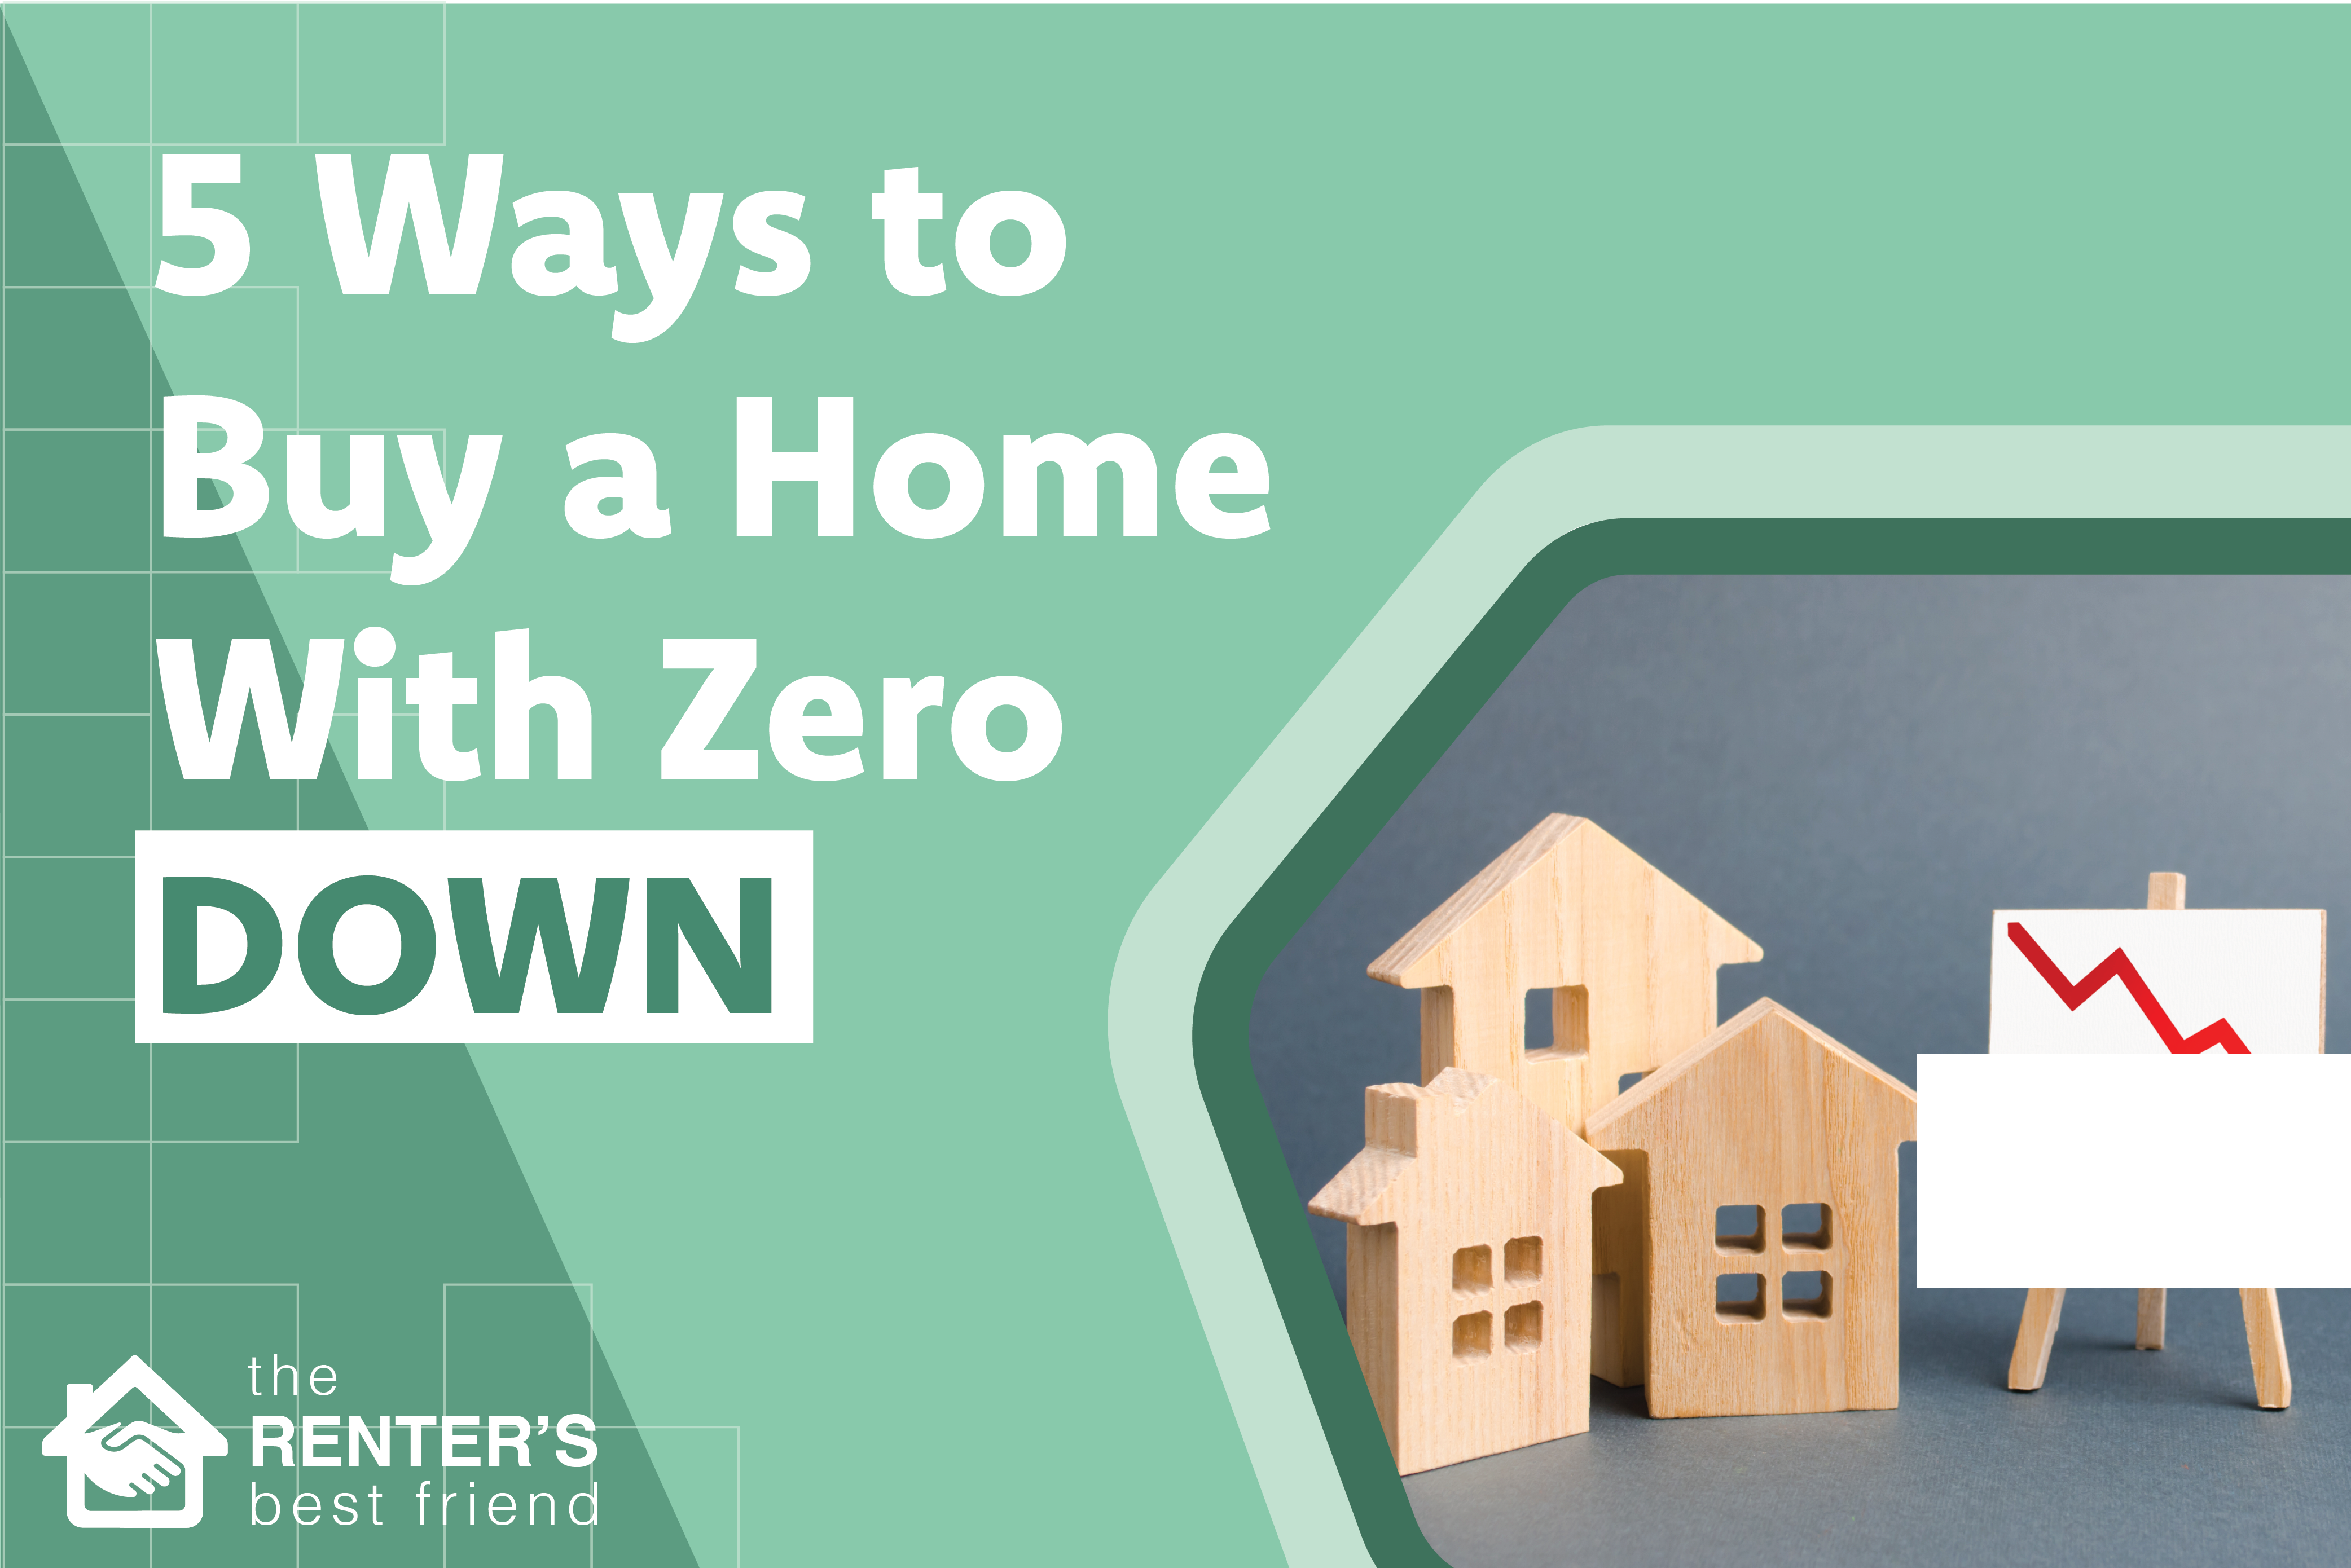 5 Ways to Buy a Home with Zero Down